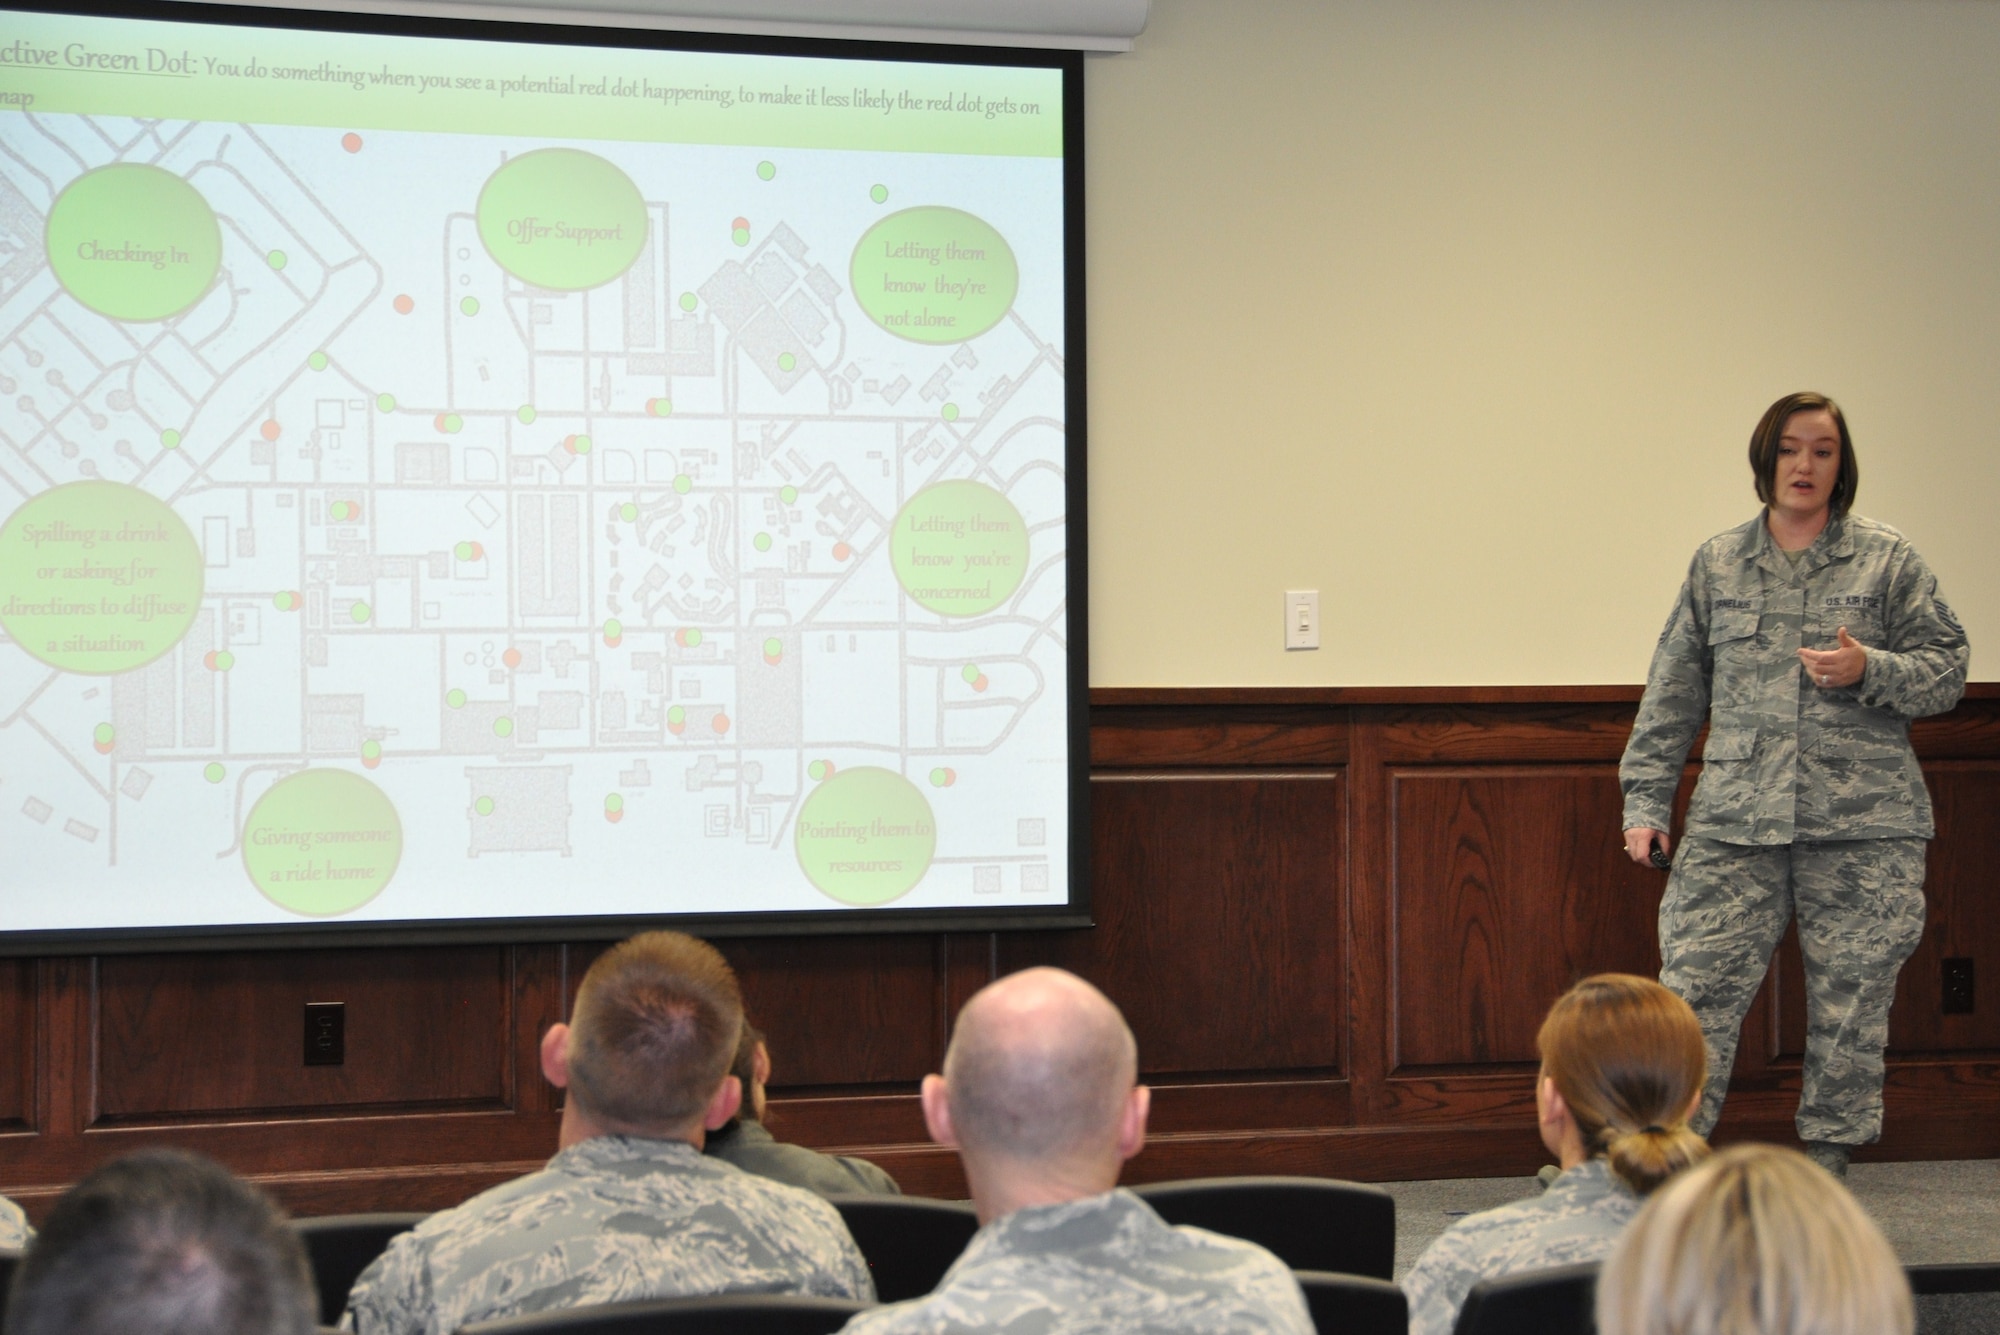 Master Sgt. Sarah Cornelius presents a brief on the Green Dot program during the 340th Flying Training Group's MUTA held Dec. 1-2 at Joint Base San Antonio-Randolph, Texas (Photo by Janis El Shabazz).